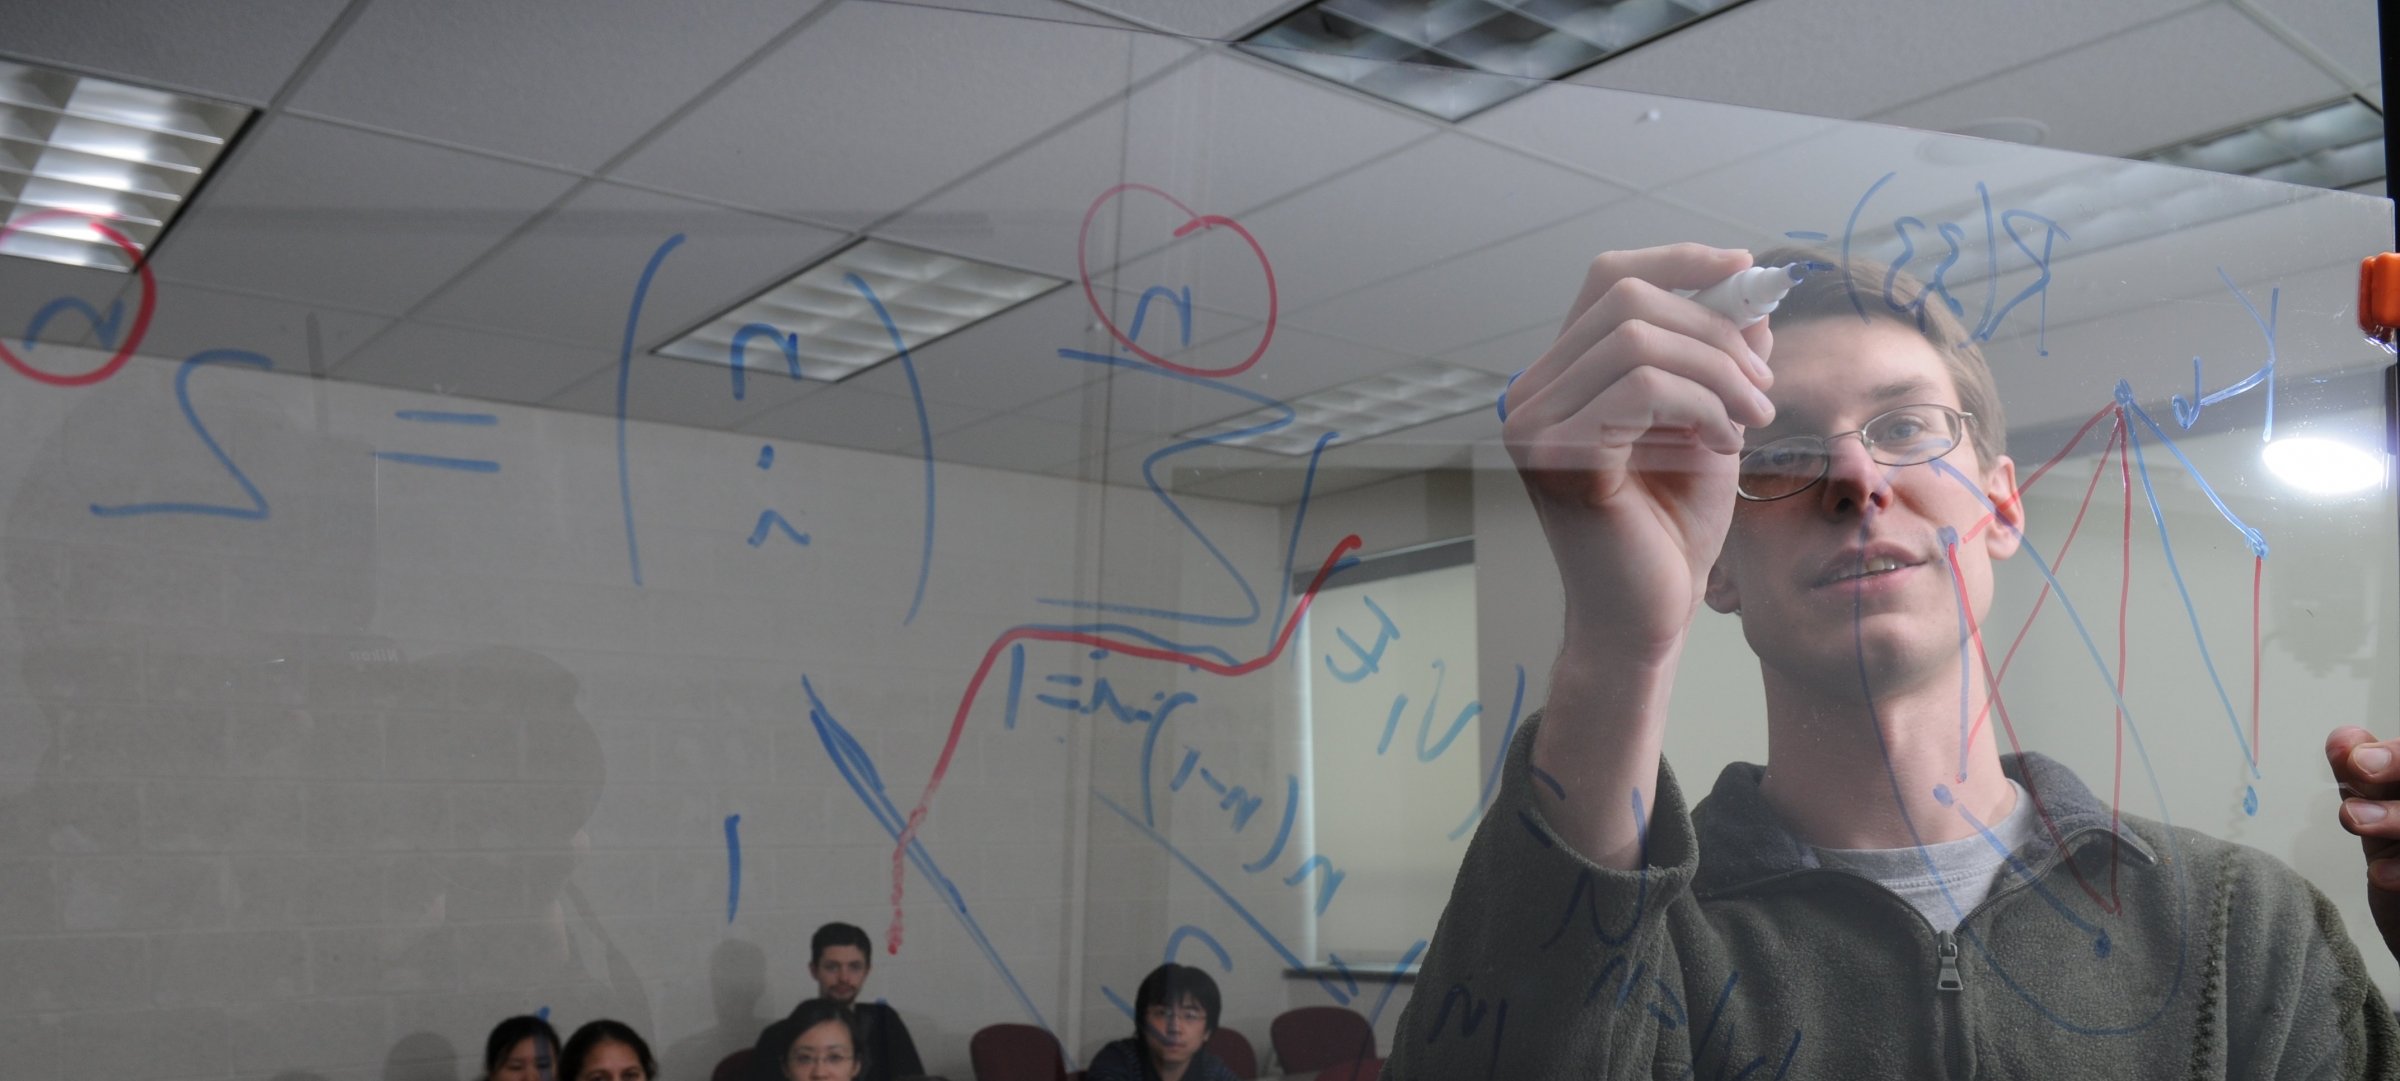 Graduate Student solving problems on a glass board